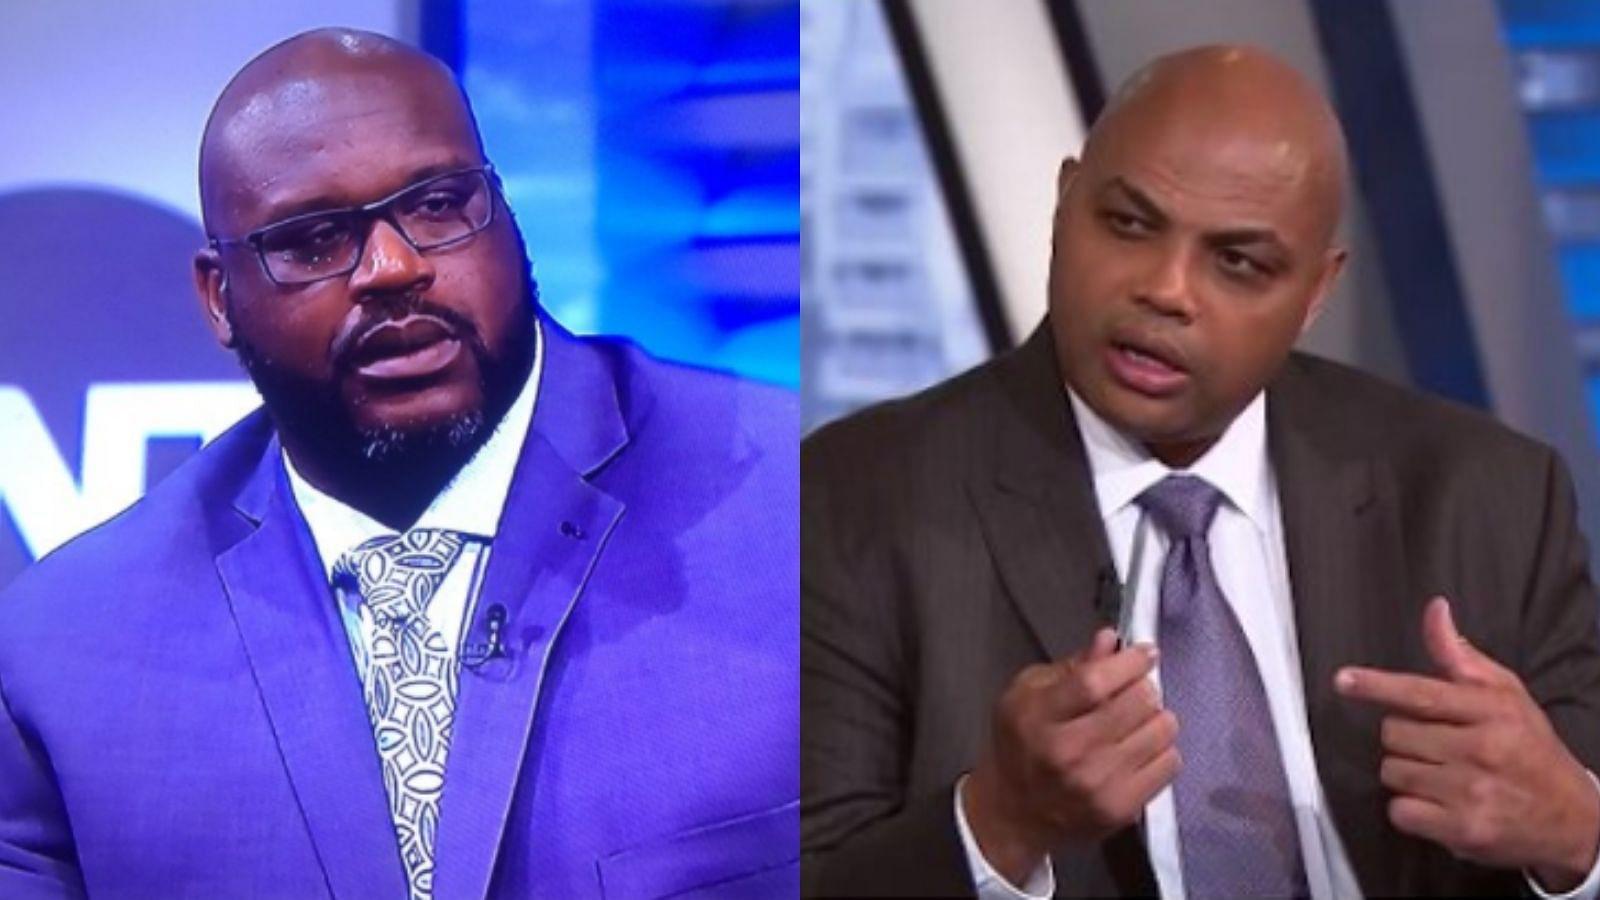 "Shaquille O'Neal Doesn't Take Sips": Charles Barkley Reveals Pet Peeve With Inside the NBA co-host on Valentine's Day